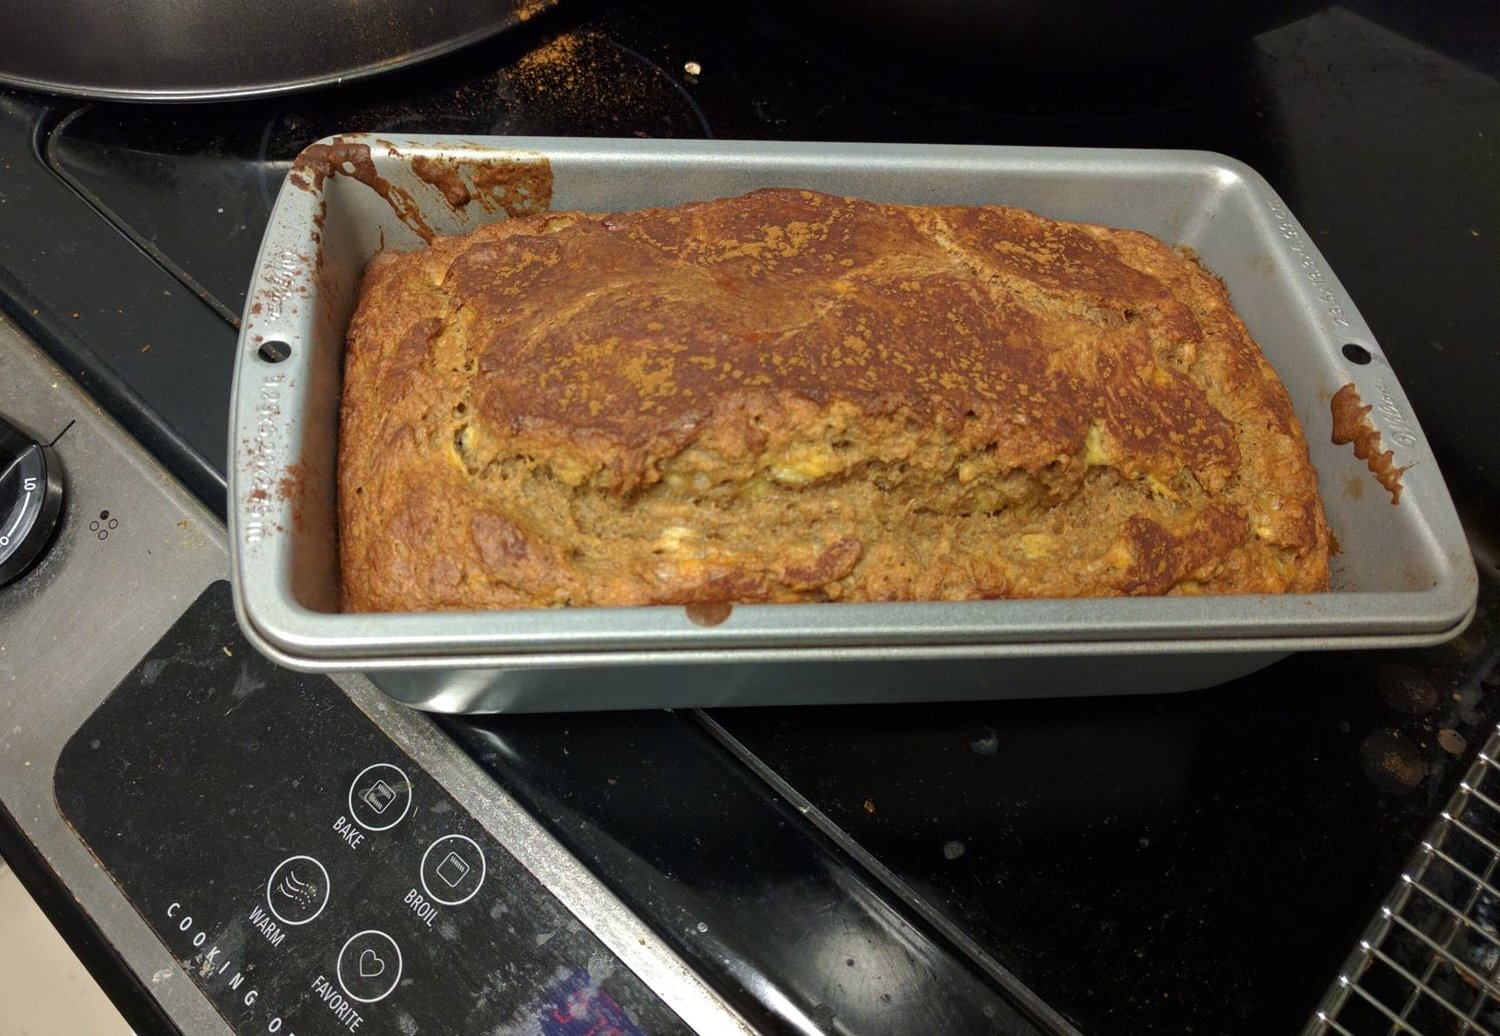 Banana bread without any added sugar